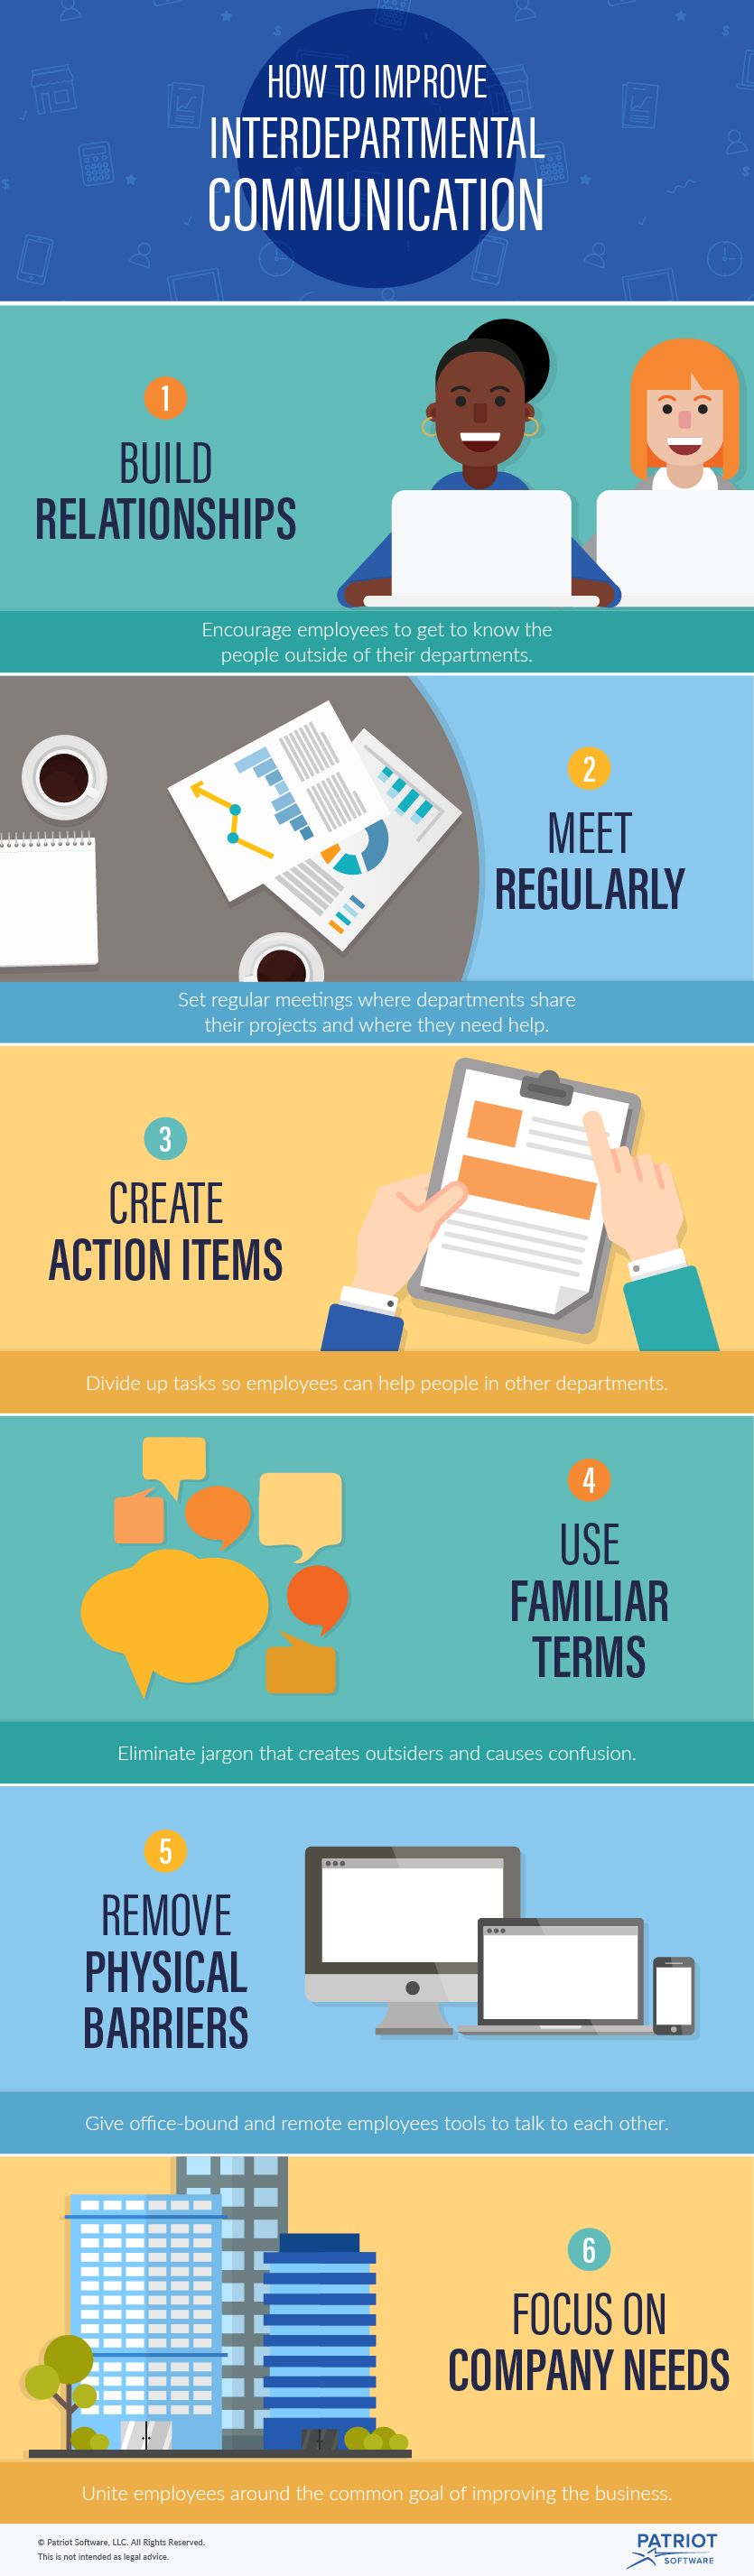 How to Improve Interdepartmental Communication Infographic